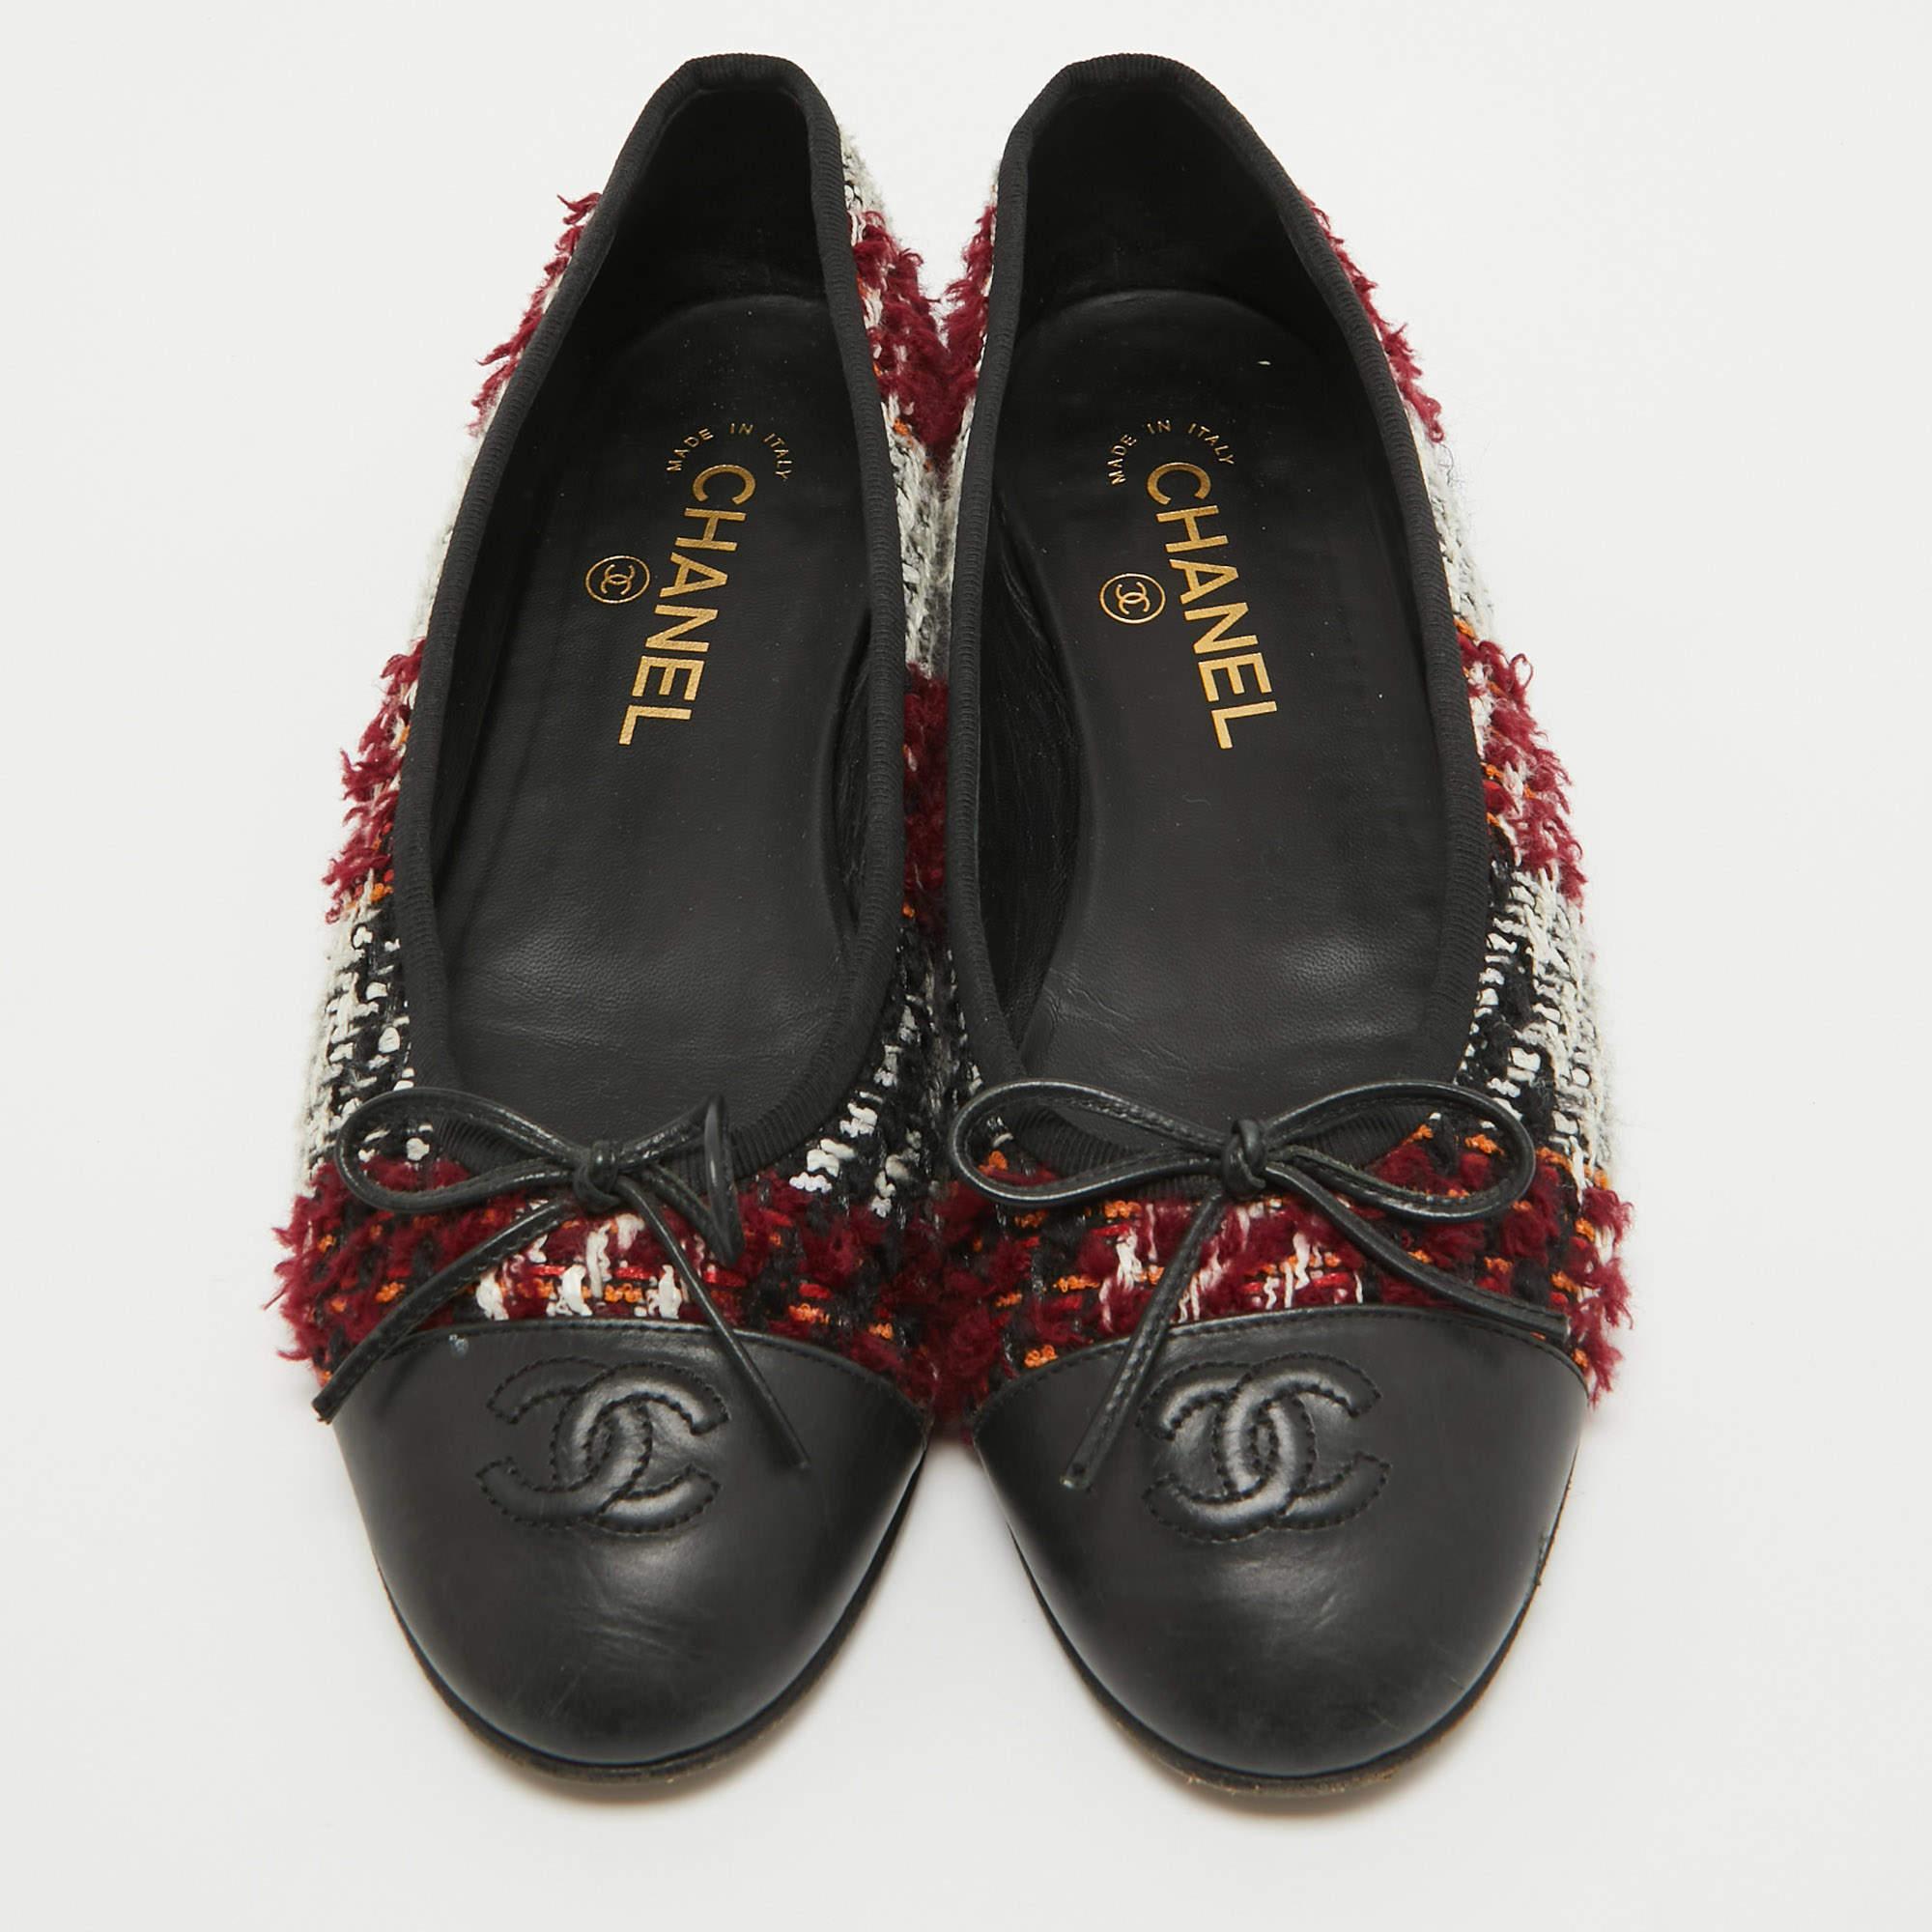 Complete your look by adding these Chanel CC ballet flats to your collection of everyday footwear. They are crafted skilfully to grant the perfect fit and style.

